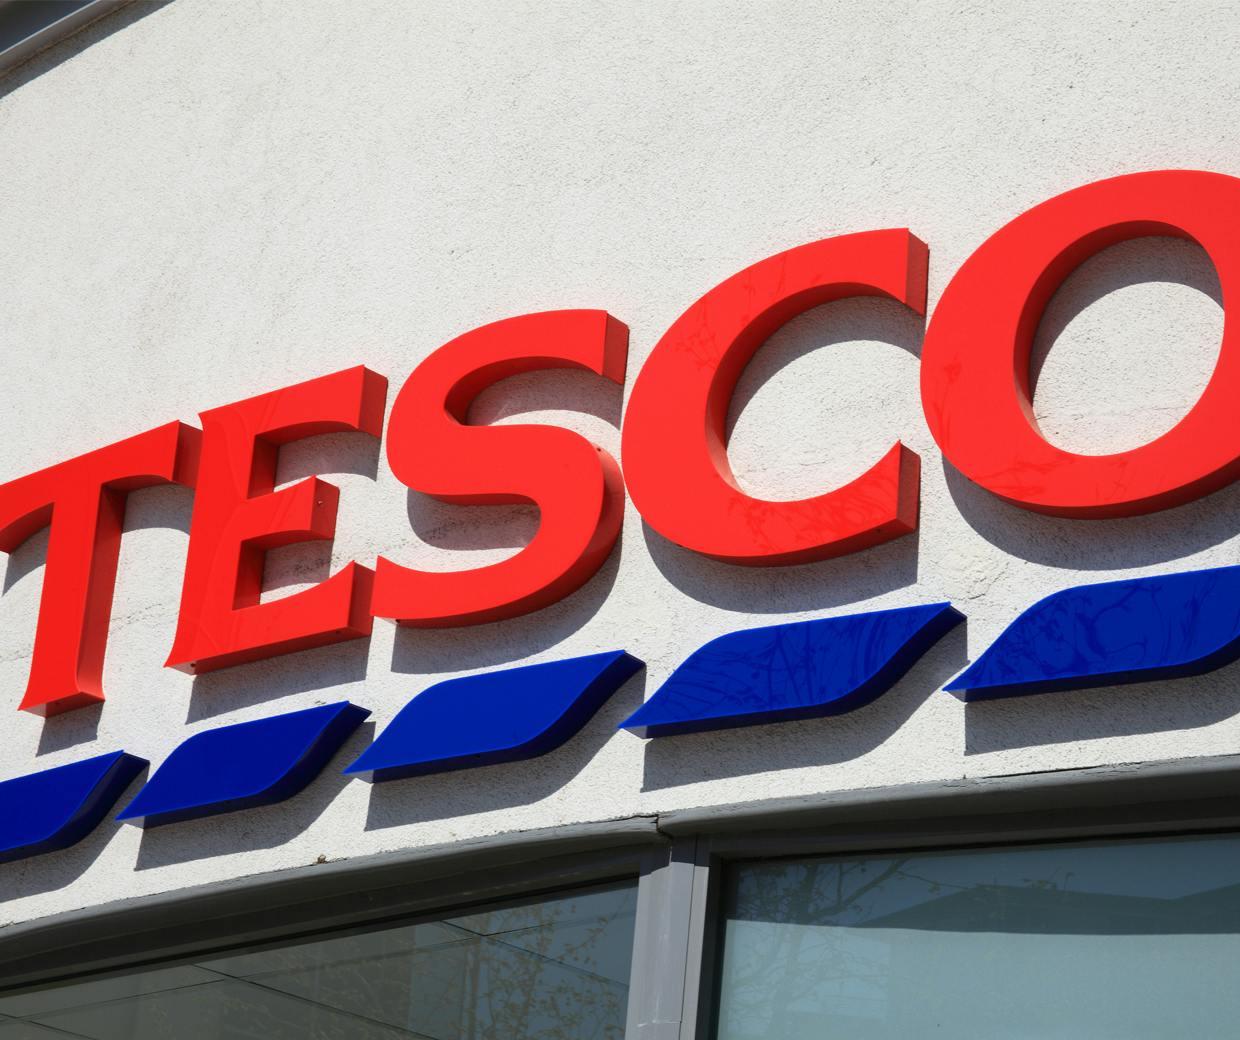 Tesco 'frustrated' at media spend being 'siphoned off' to protect brand  reputation